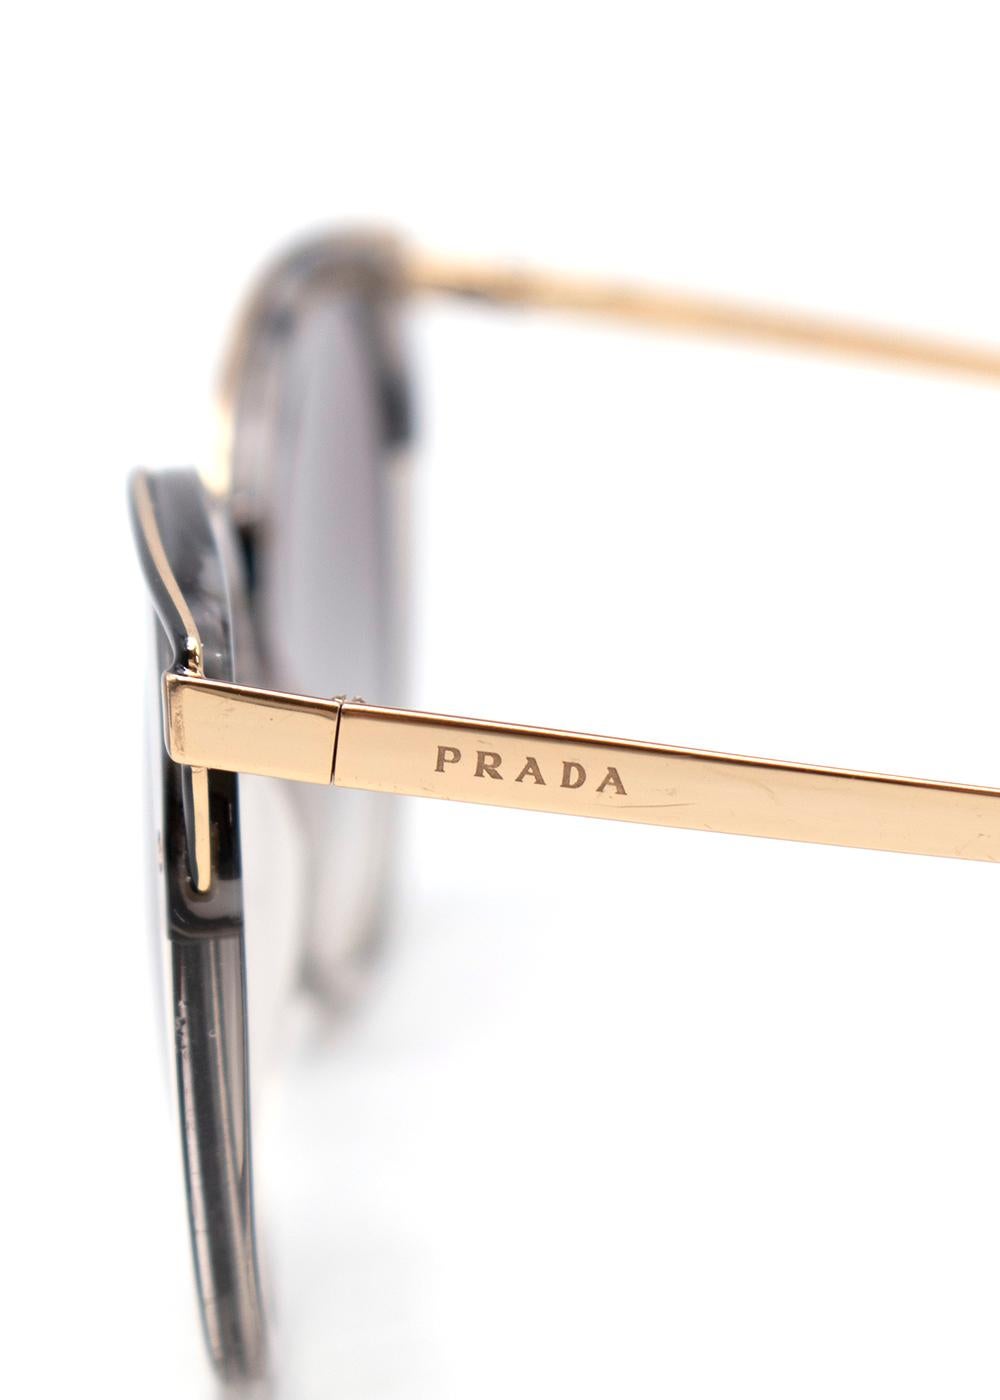 Prada Grey & Black Metal Frame Sunglasses In Excellent Condition For Sale In London, GB